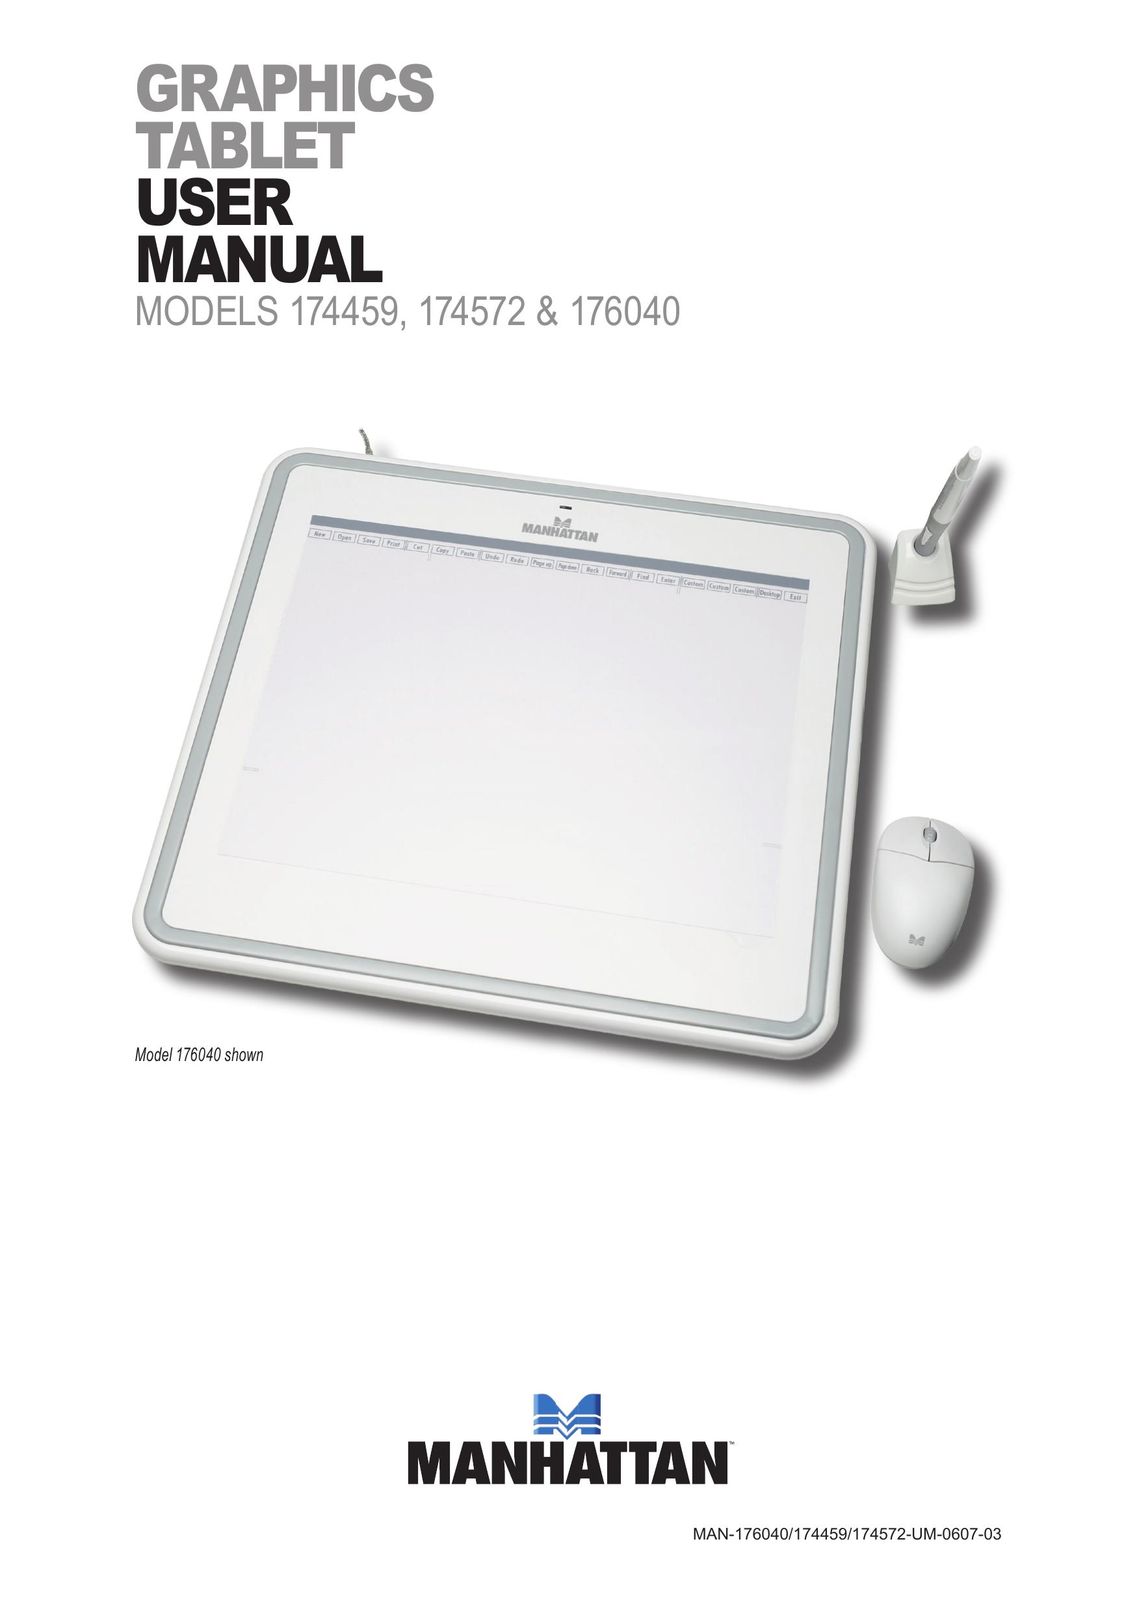 Manhattan Computer Products 176040 Graphics Tablet User Manual